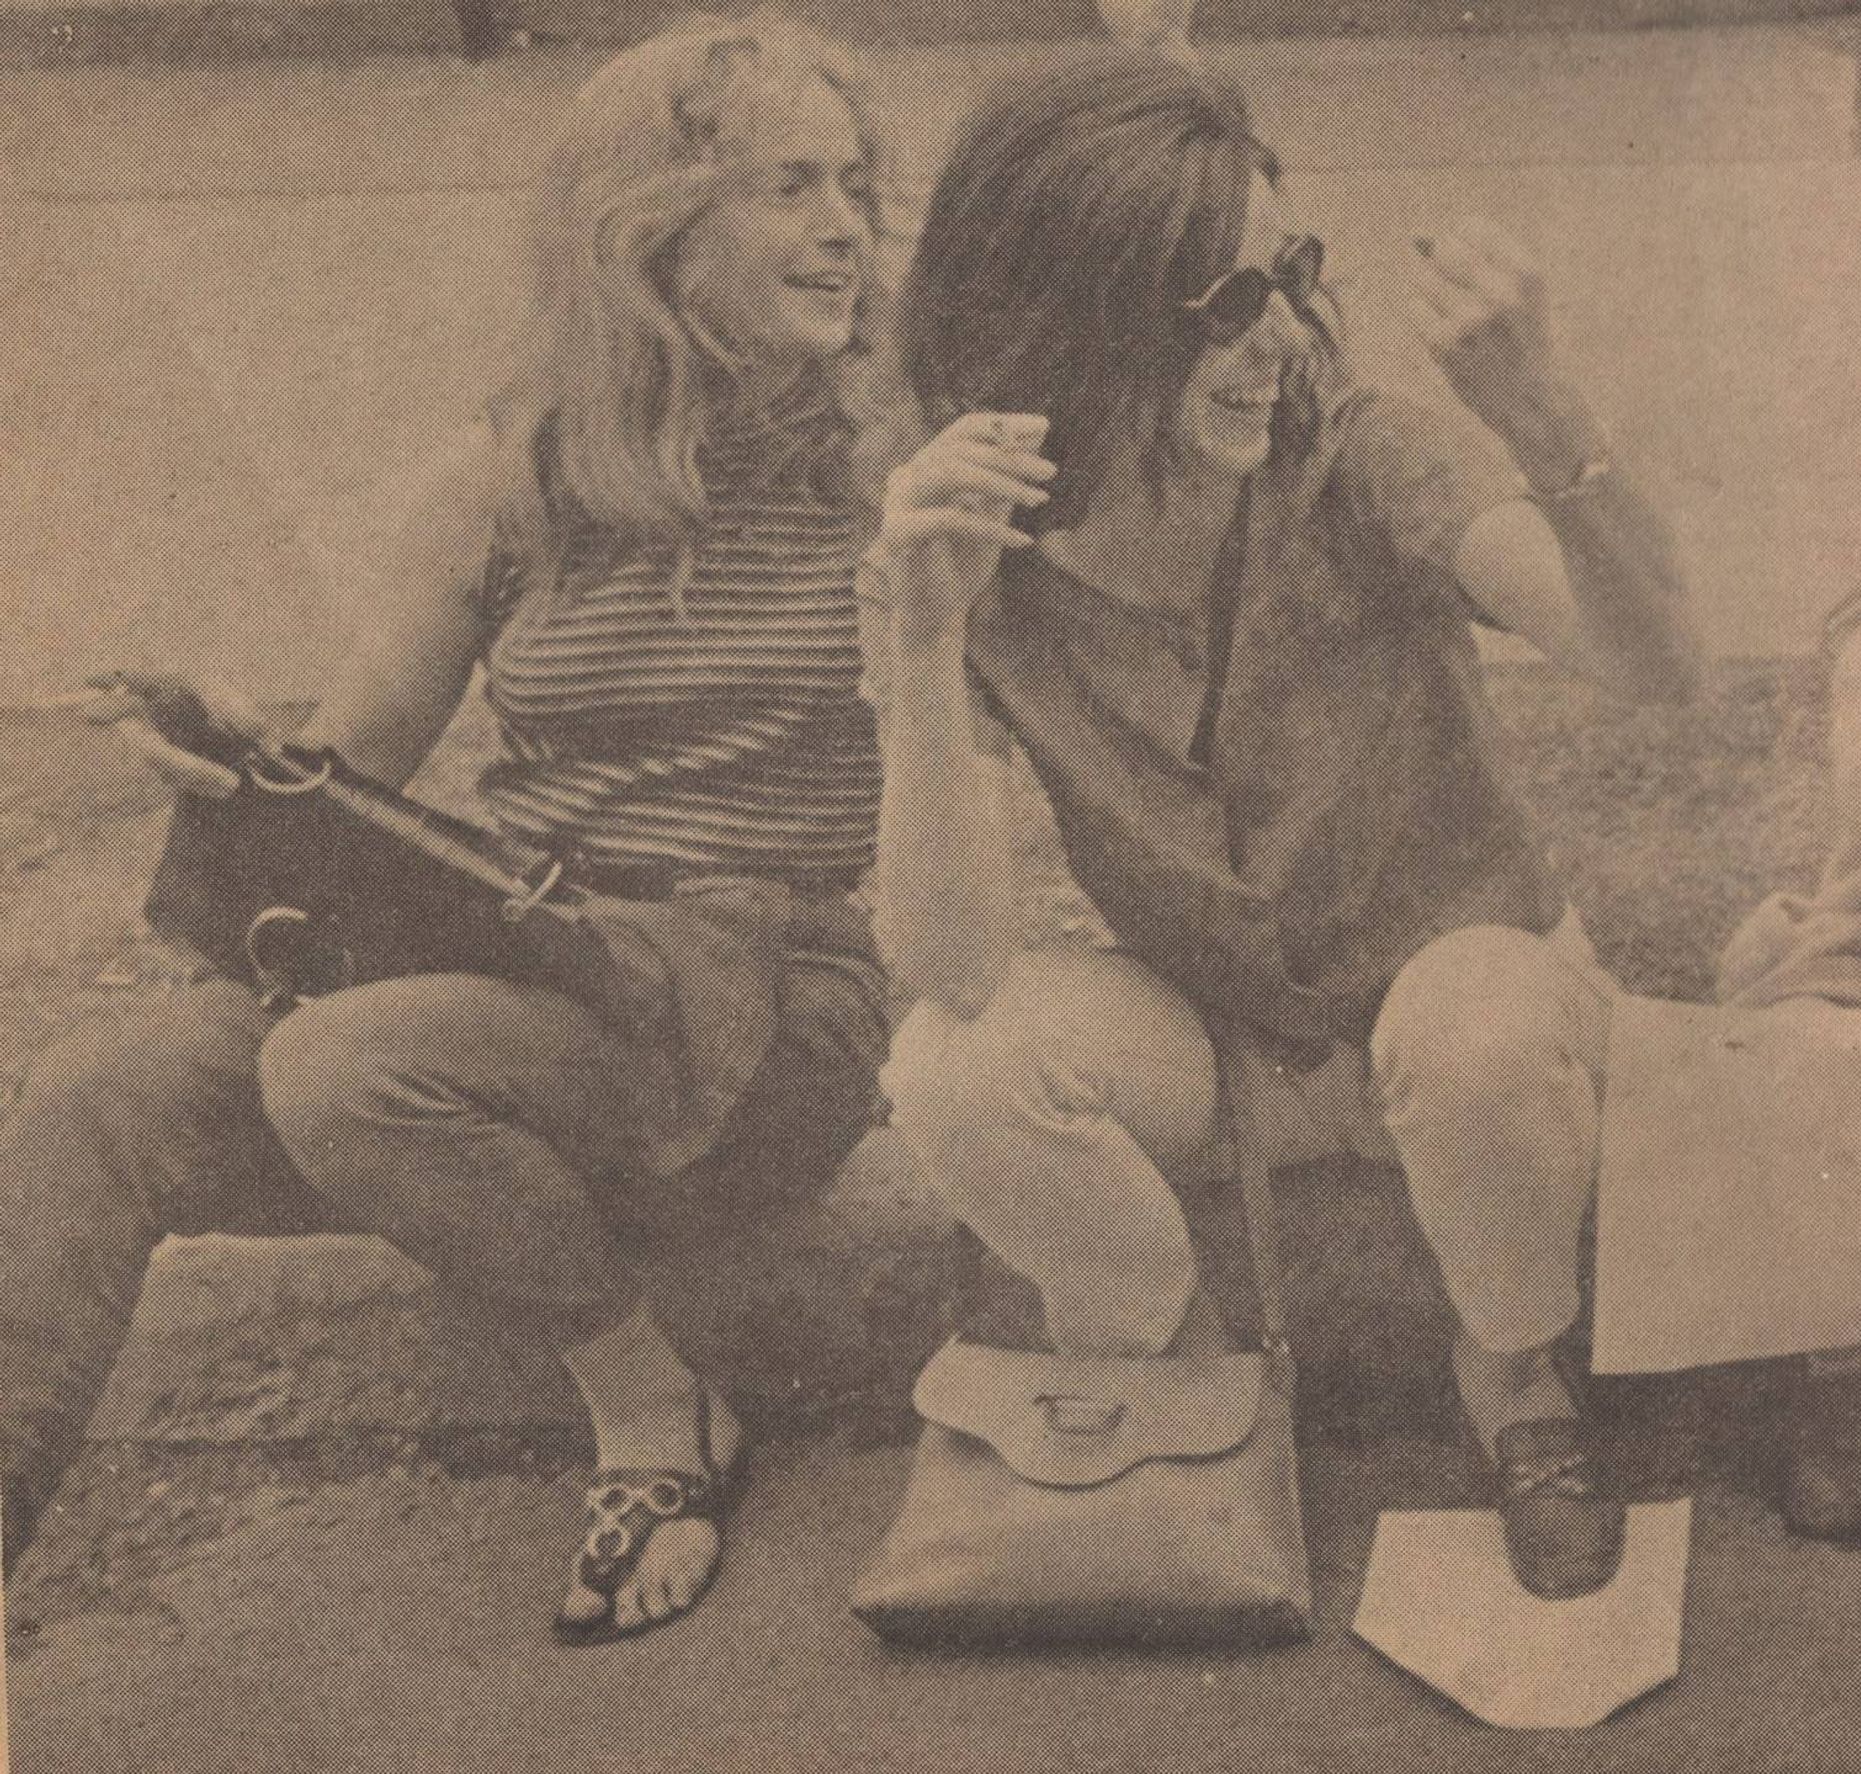 The author's mother (left) and late aunt (right) at a protest in 1970, the year the Mary Tyler Moore Show premiered.